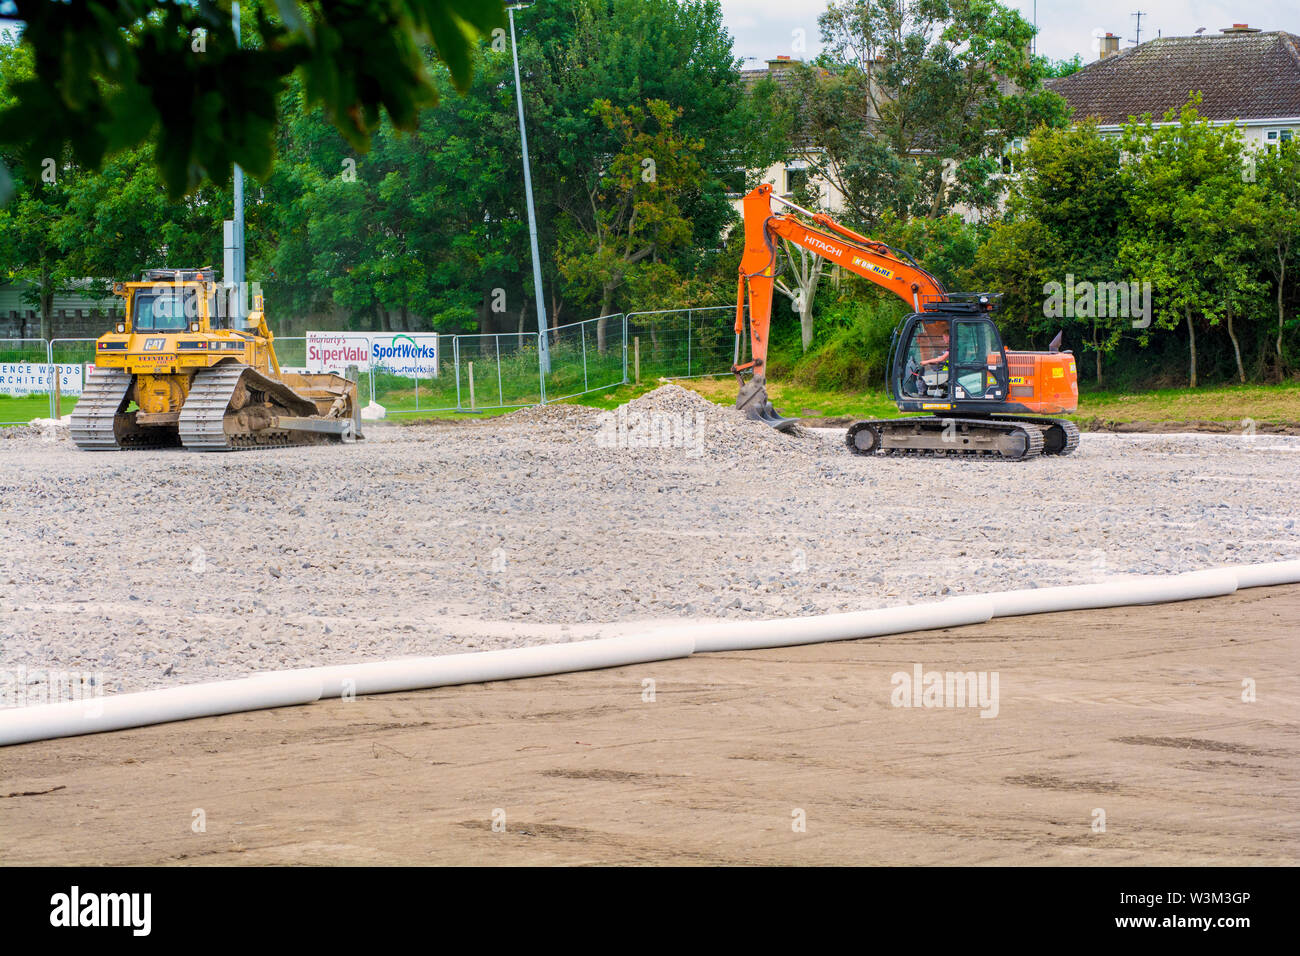 Ground being prepared for the installation of an all-weather pitch at a rugby club Stock Photo